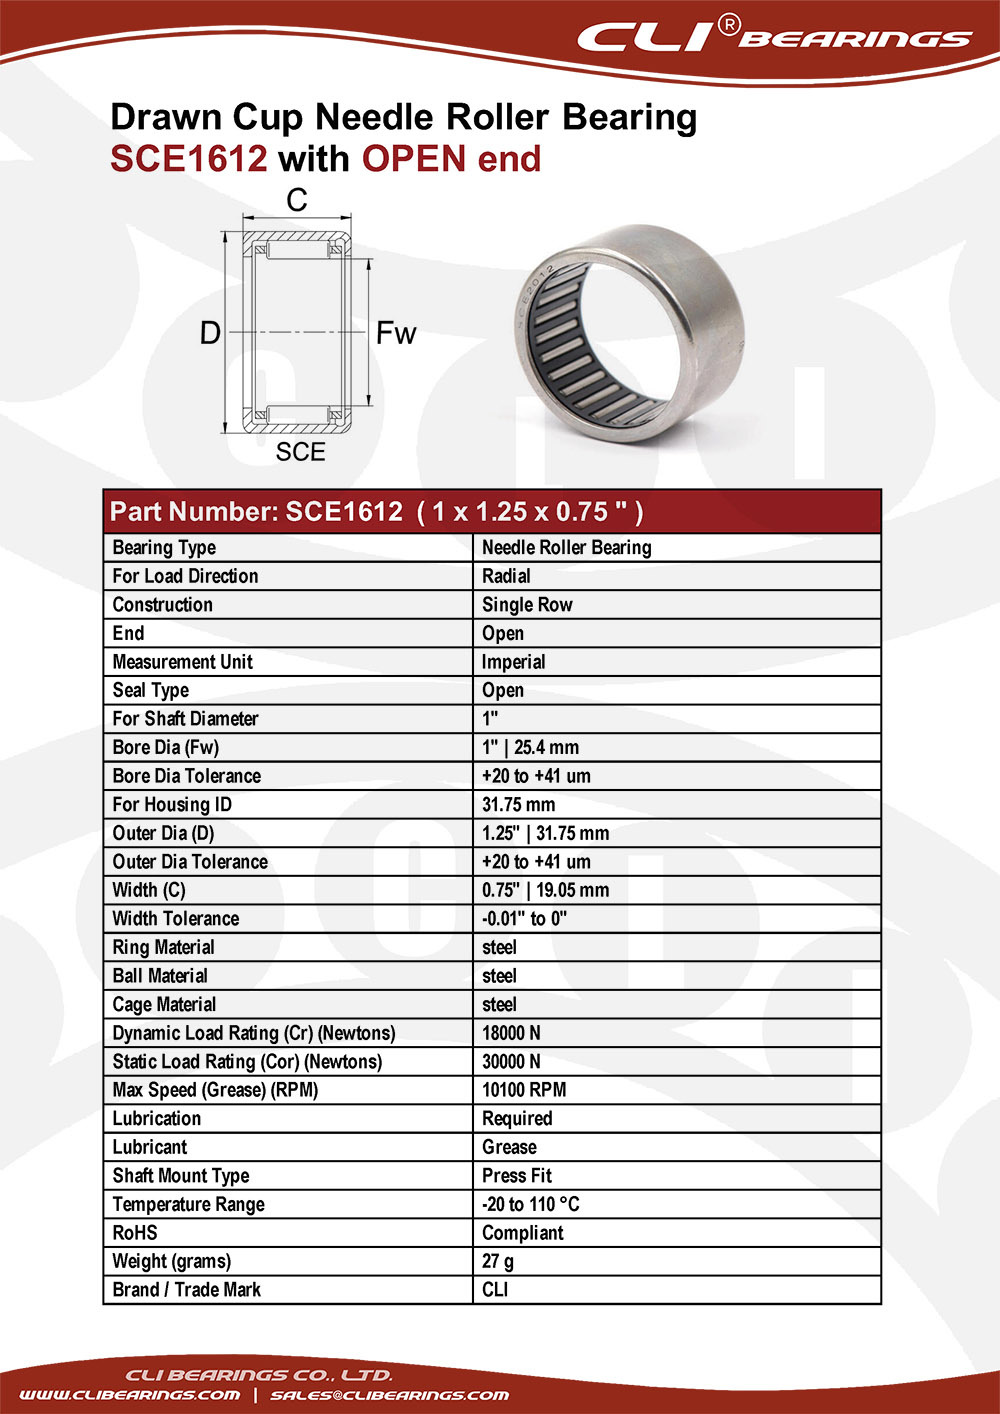 Original sce1612 1x1 25x0 75 drawn cup needle roller bearings with open ends   cli bearings co ltd nw